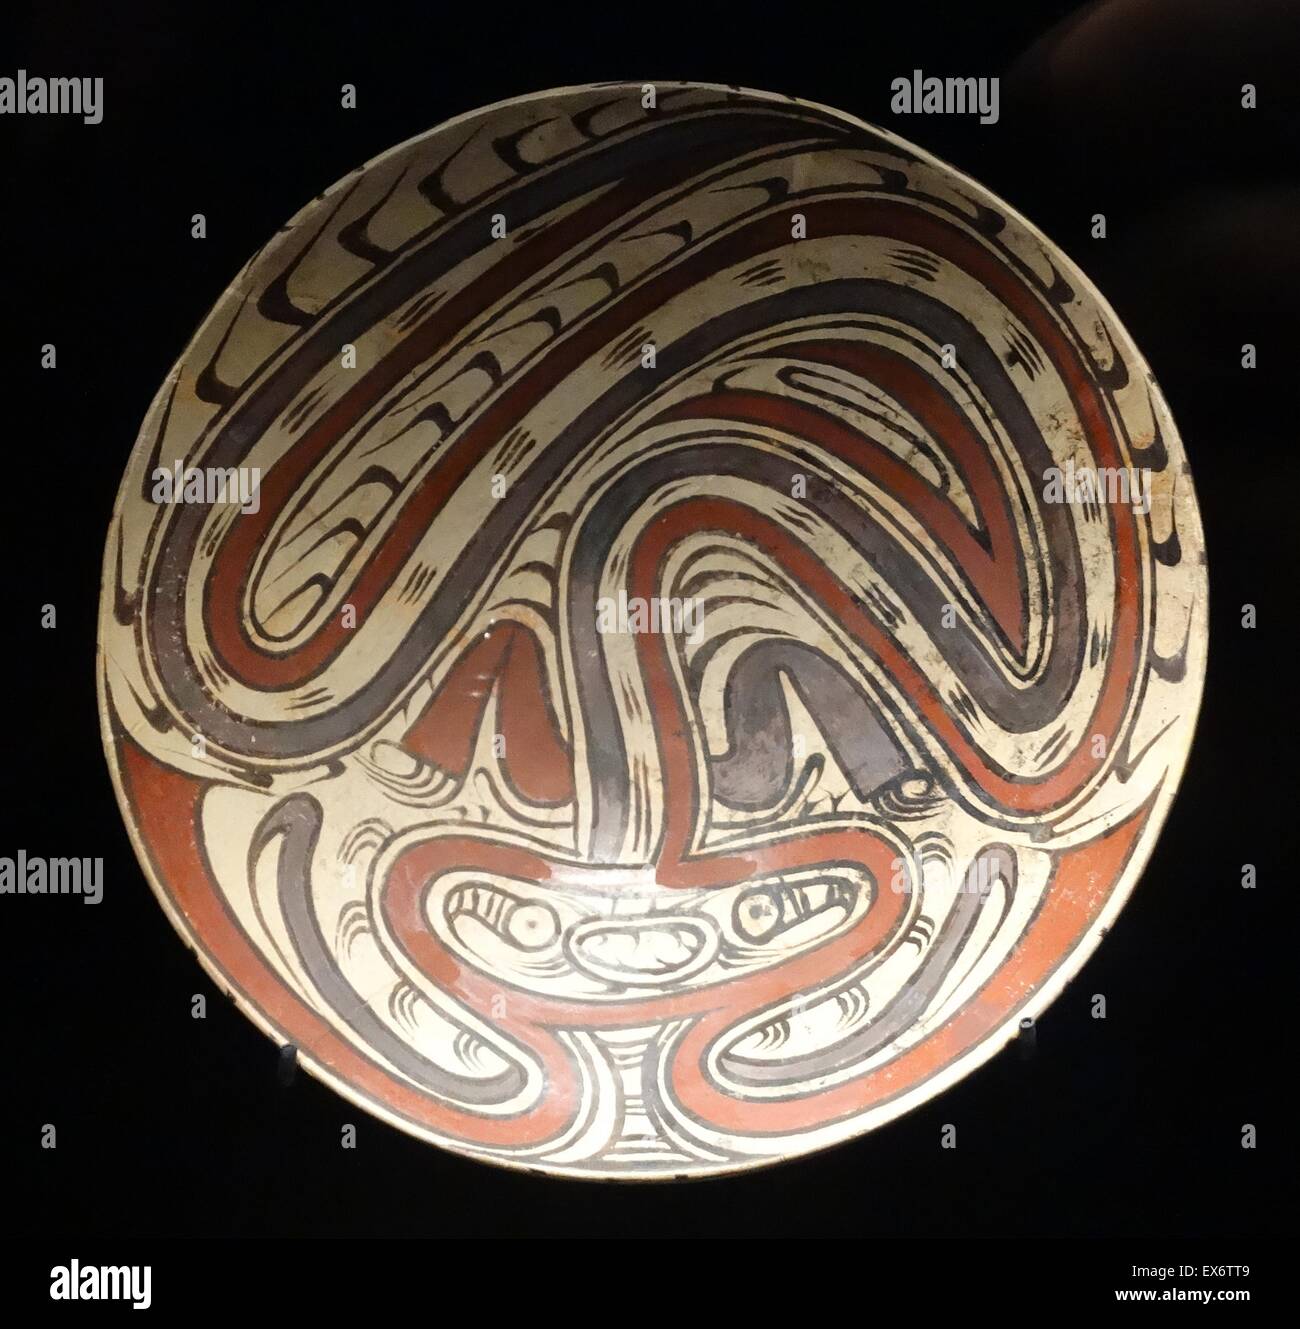 Polychrome ceramic from Panama. Depicting a snake monster. The ceramic would have been used in funerals and would have sat on a bed of ash. Stock Photo